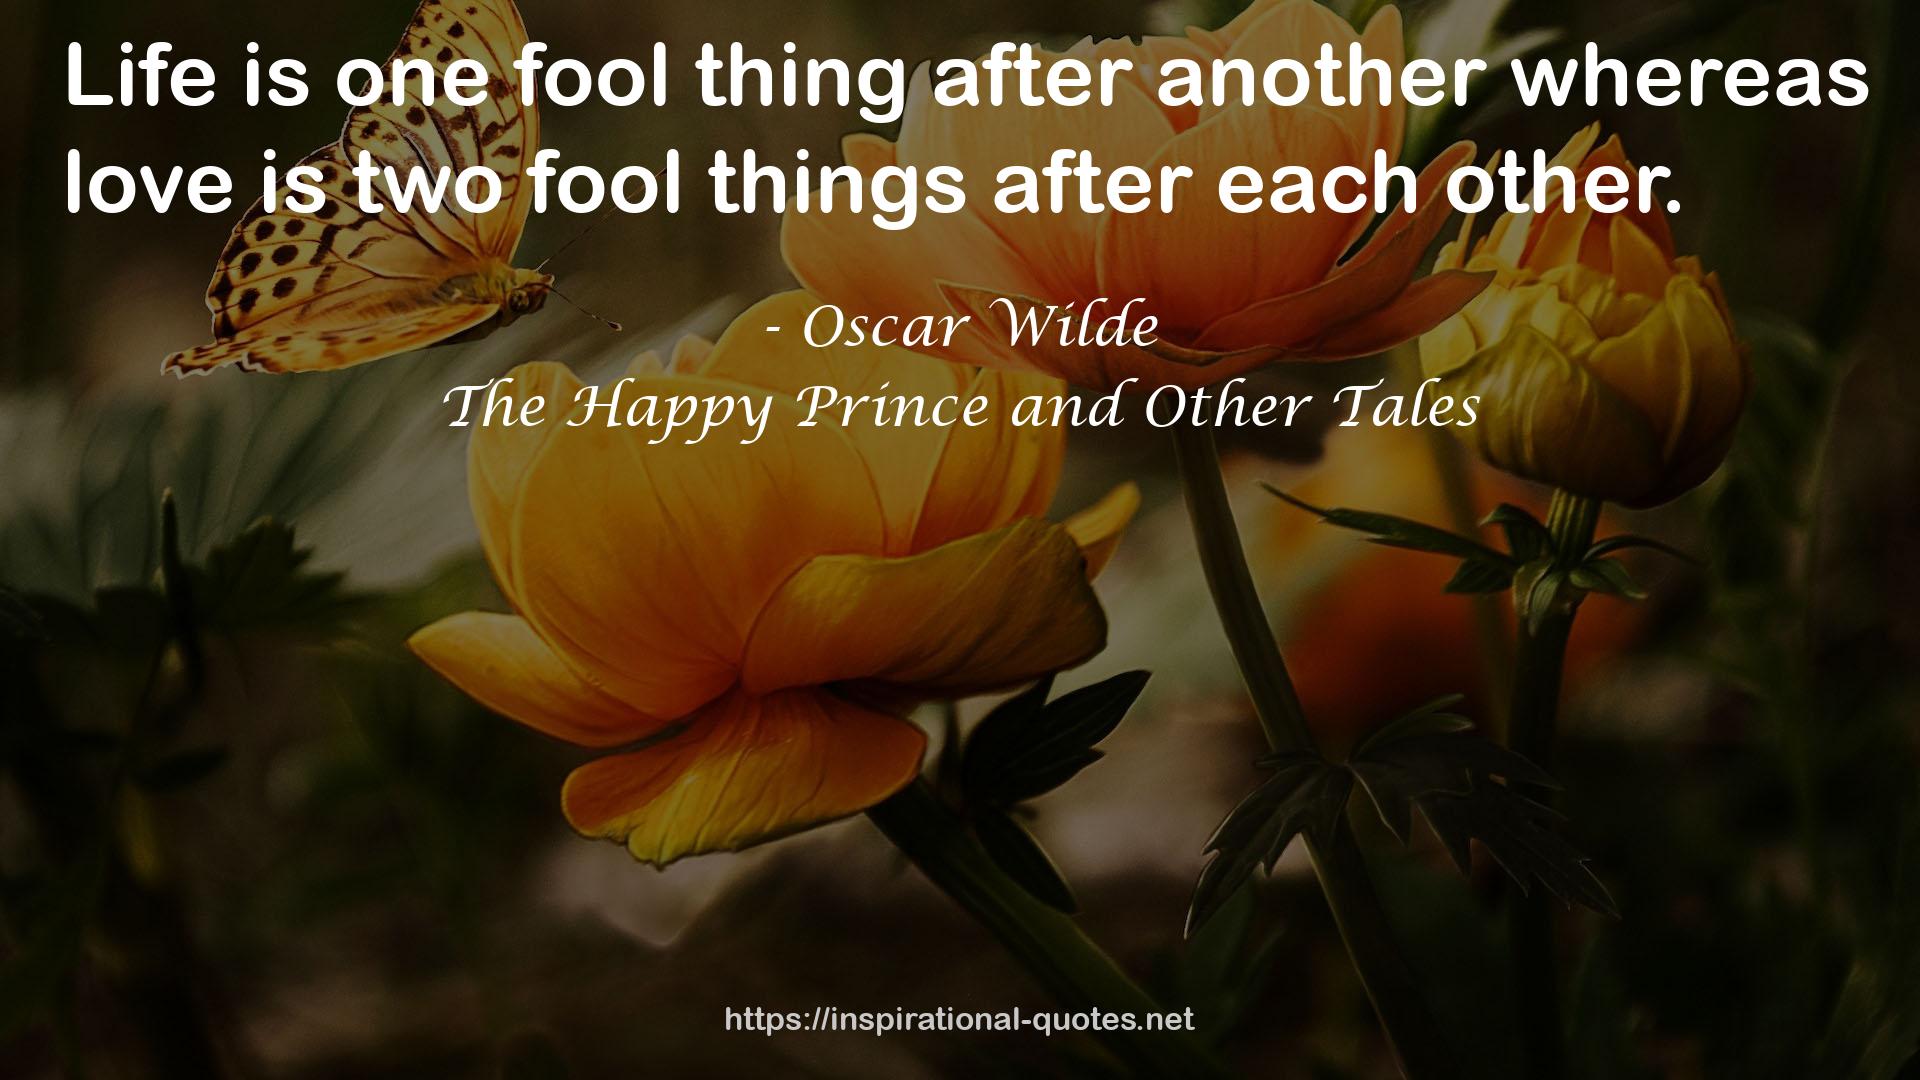 The Happy Prince and Other Tales QUOTES